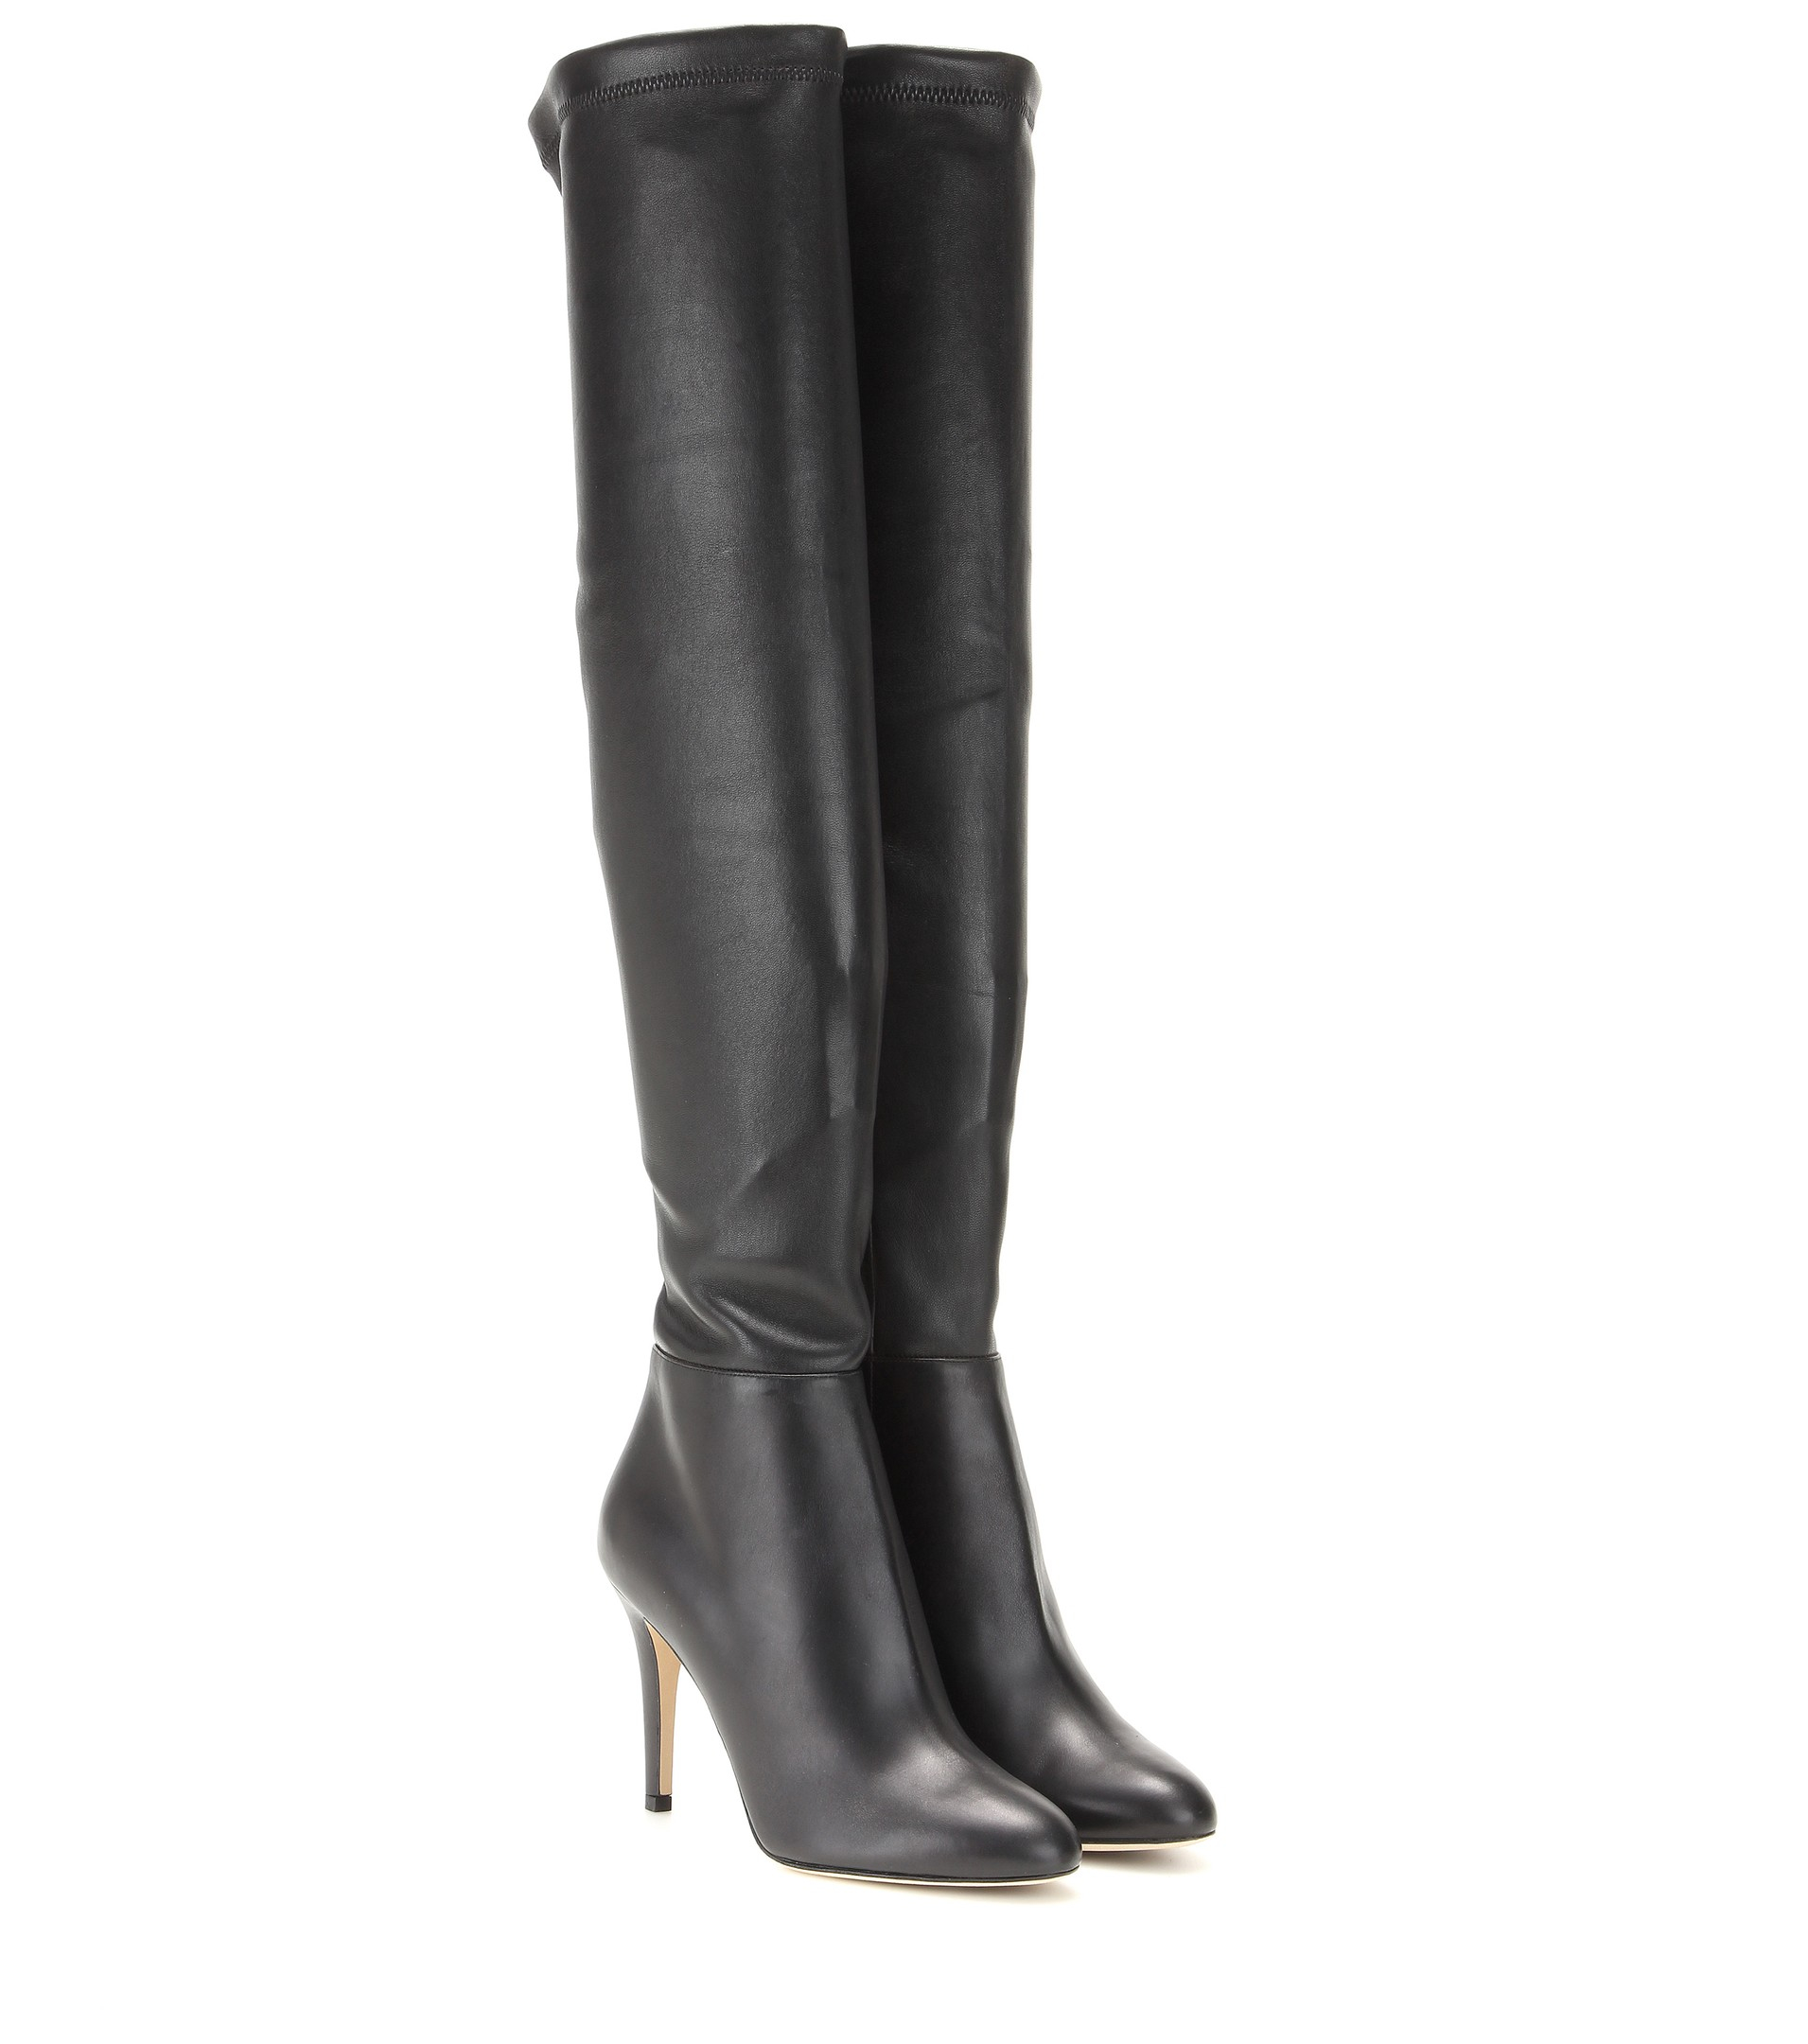 Lyst - Jimmy choo Toni Leather Over-The-Knee Boots in Black